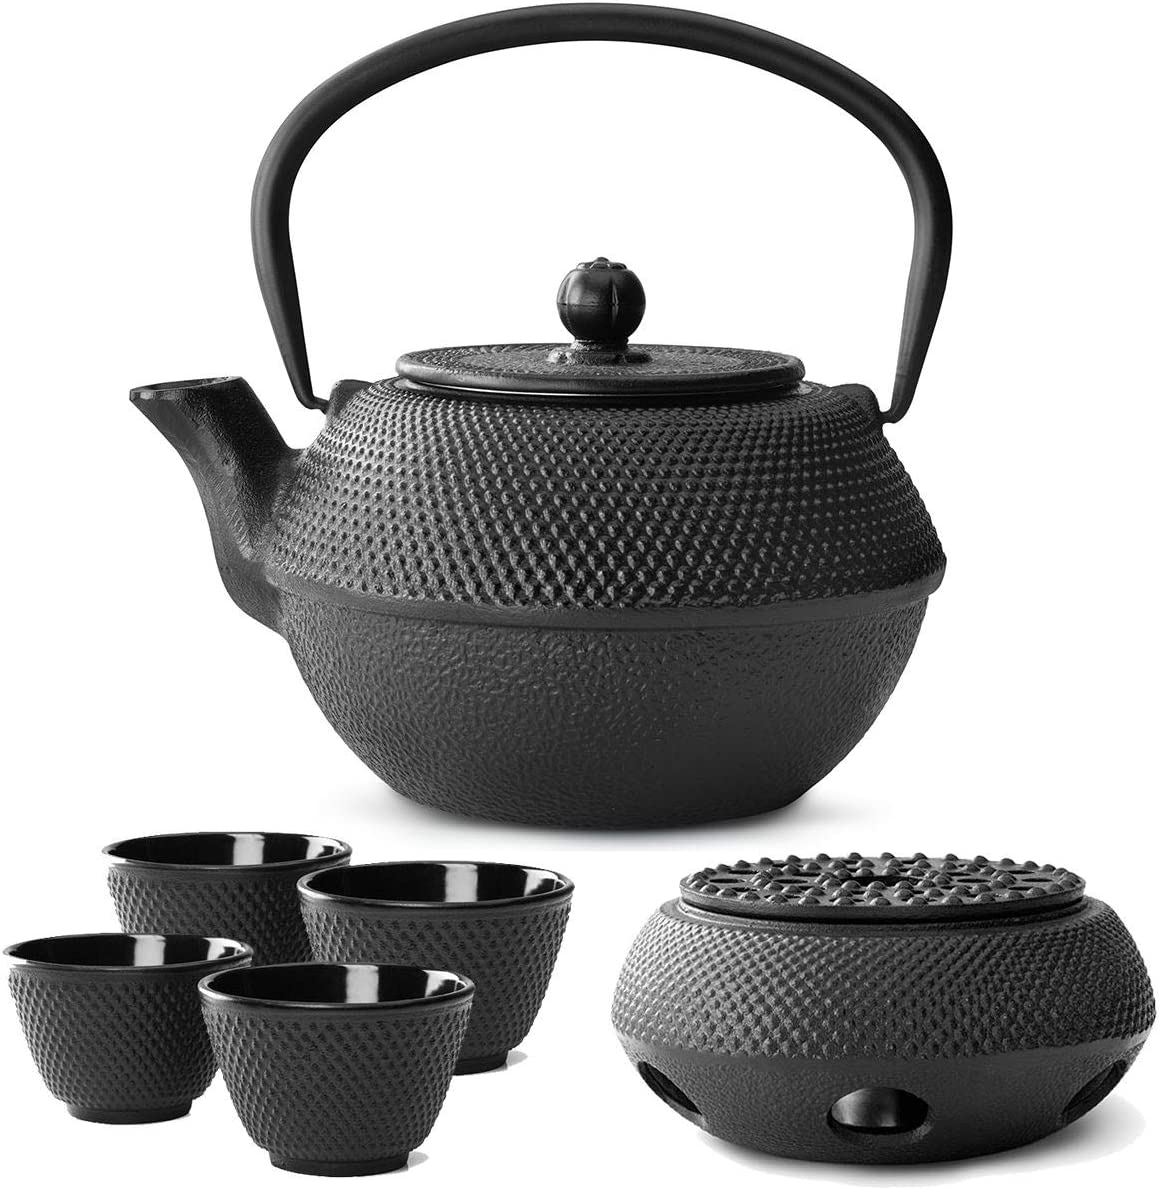 Bredemeijer Teapot Asian Cast Iron Set Black 1.1 Litre with Tea Filter Strainer with Tea Warmer & Tea Cup (4 Cups)